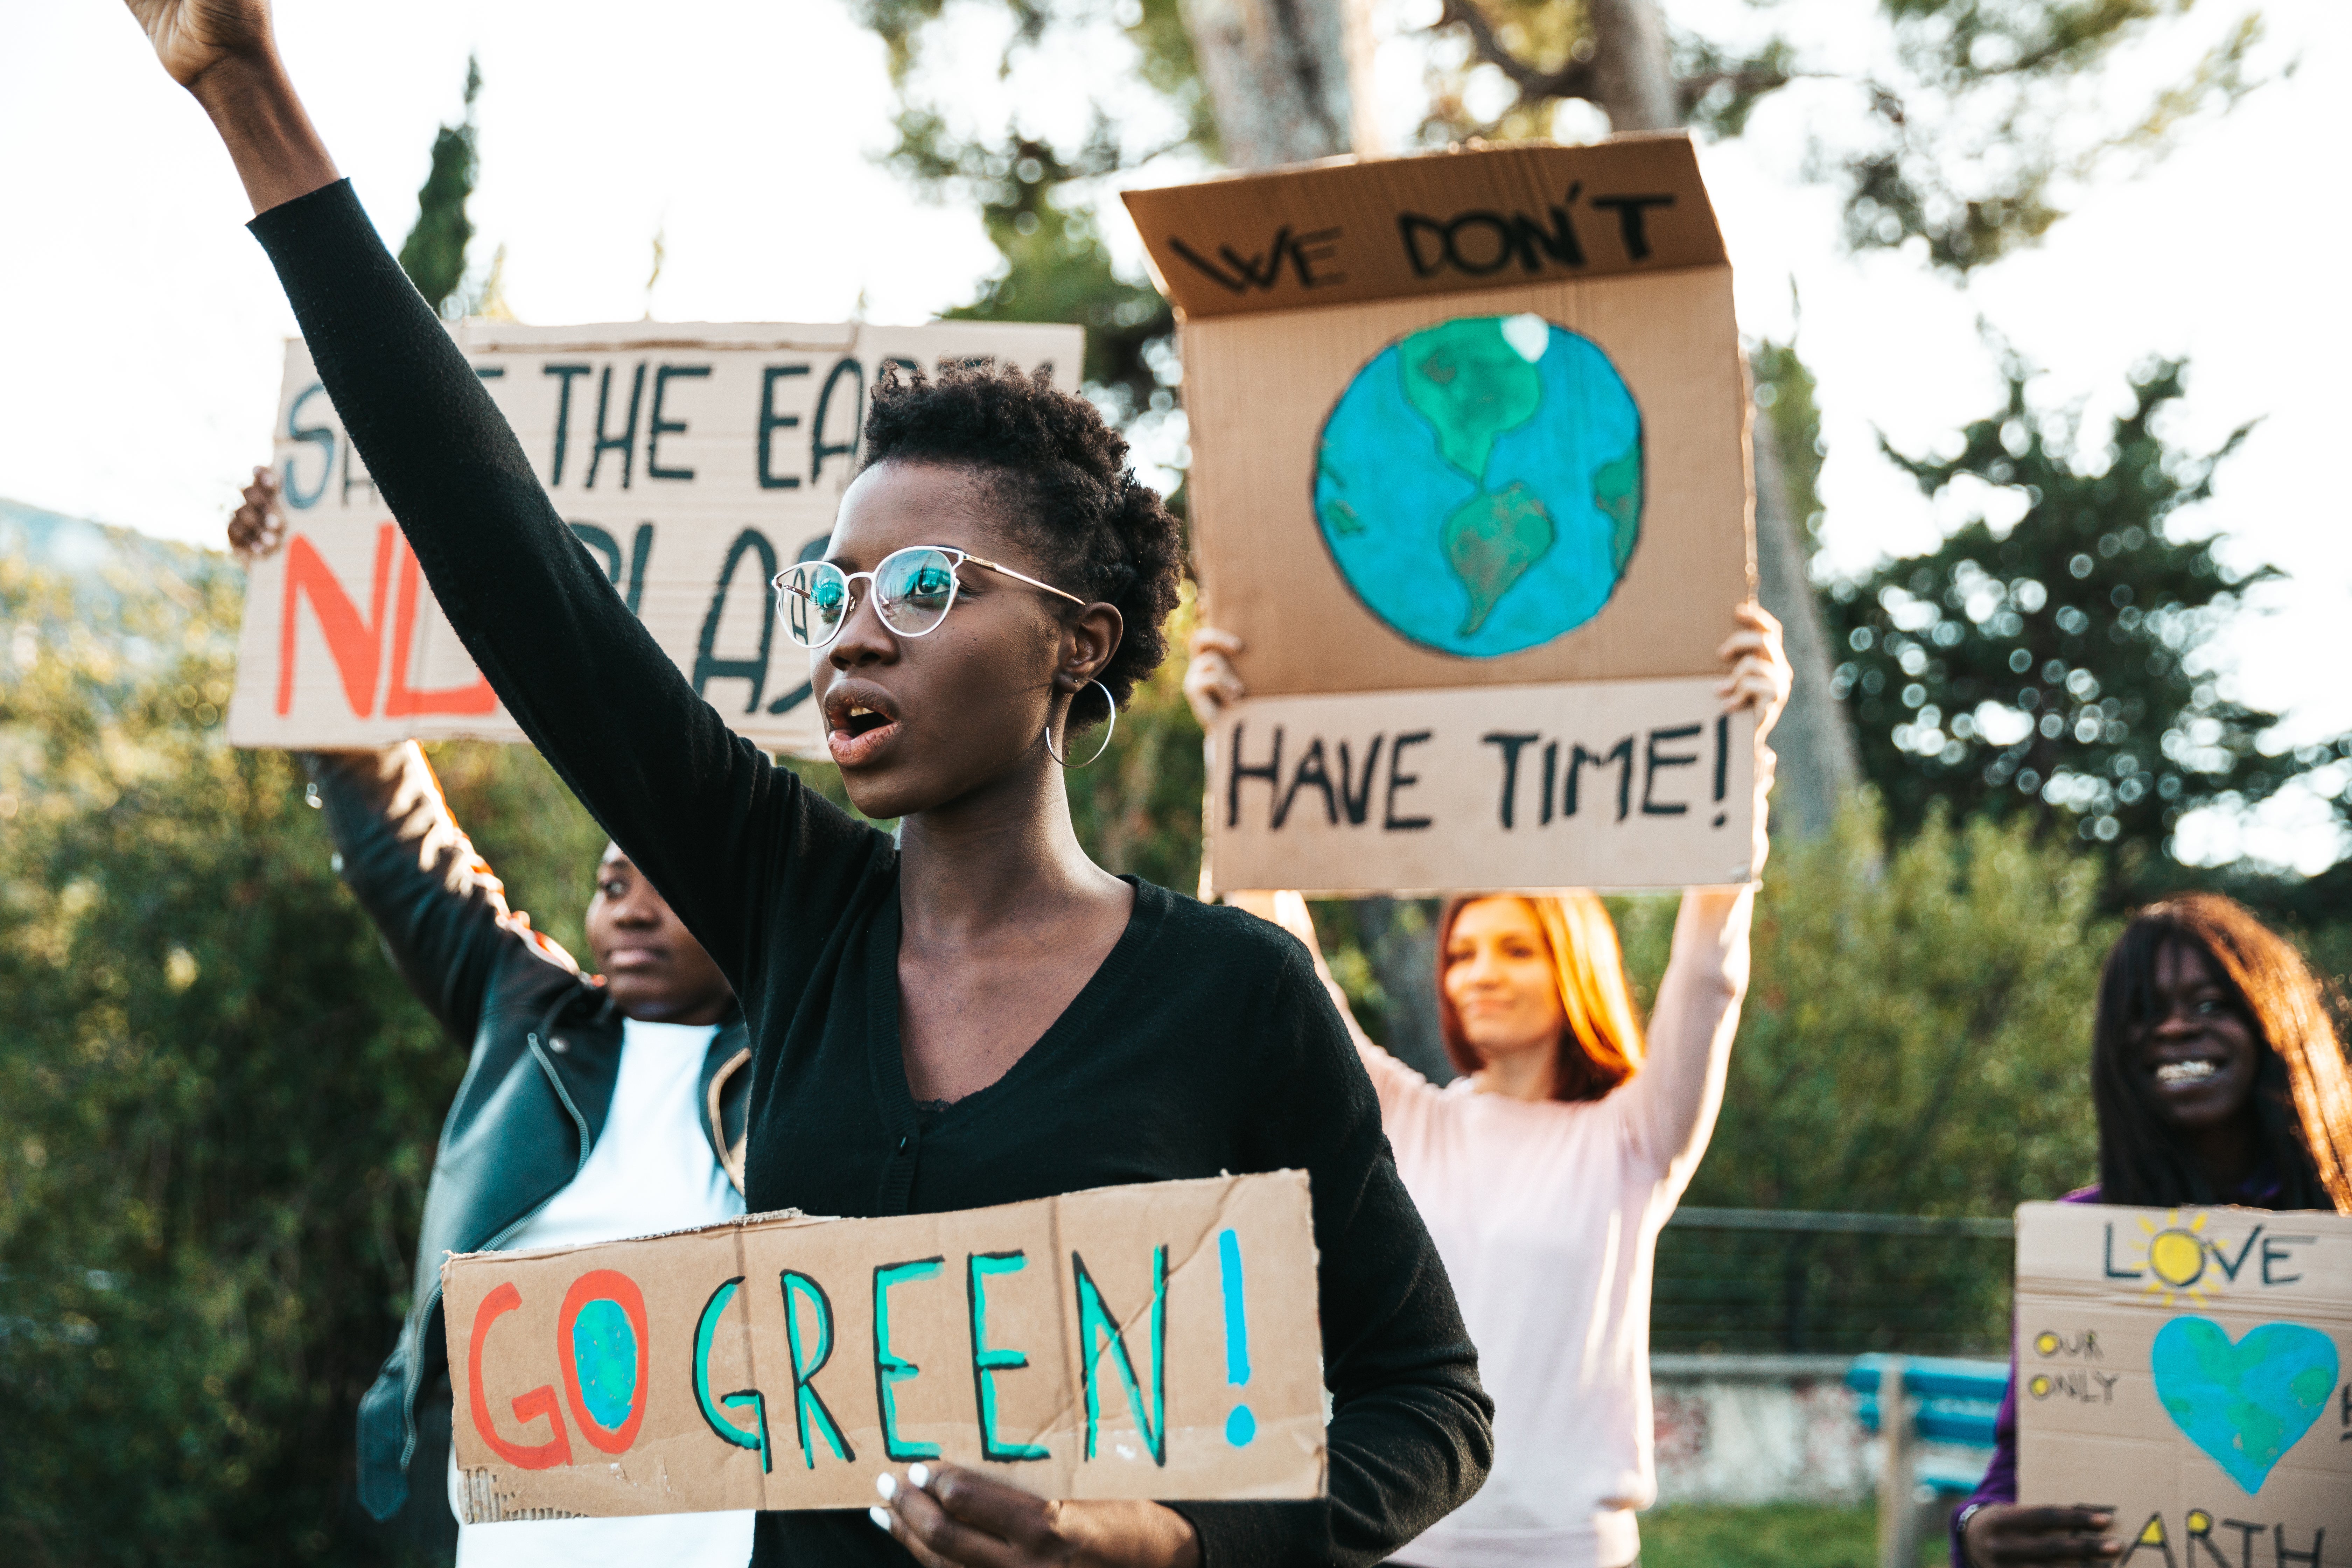 Young people are providing leadership in the fight against climate change